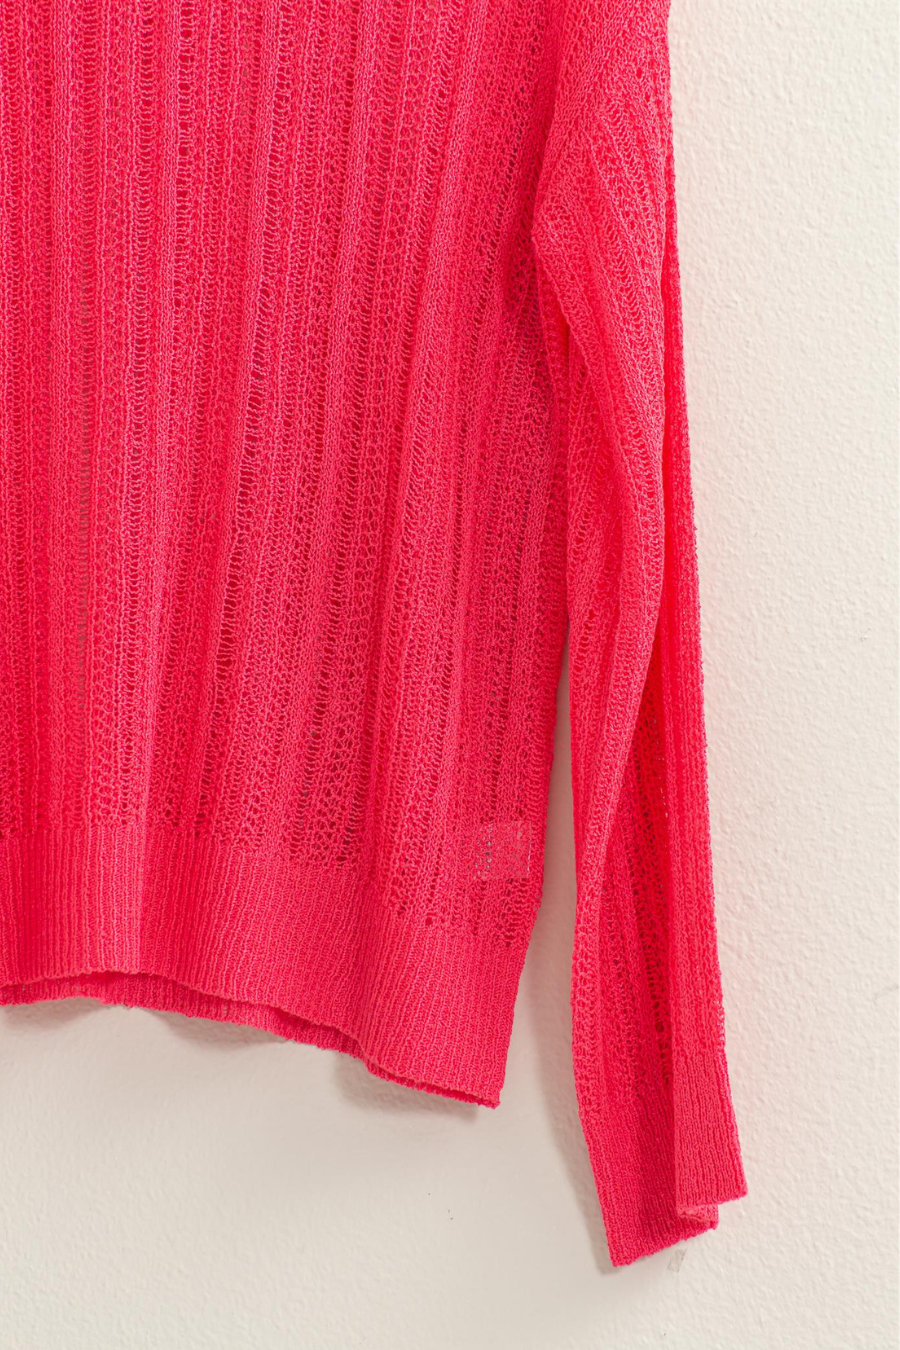 close up of knit of pink lottie sweater 